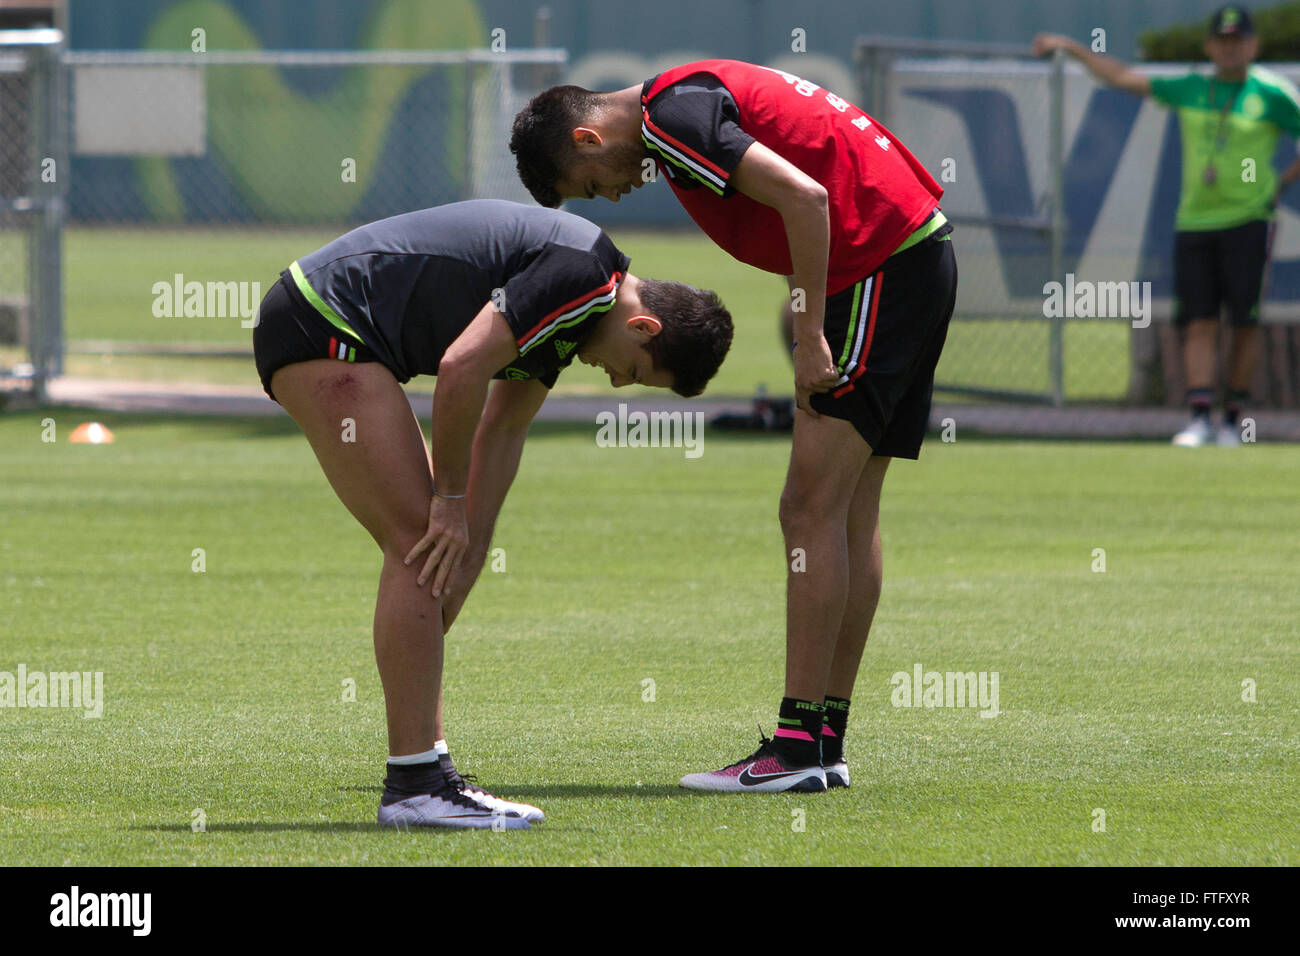 Mexico City, Mexico. 28th Mar, 2016. Mexico's National Team players Javier Hernandez (L) and Diego Reyes take part in a training session at High Performance Center (CAR, for its acronym in Spanish), in Mexico City, capital of Mexico, on March 28, 2016. Mexico's National Team will play with Canada on March 29 in a qualifying match for the 2018 Russia World Cup. © Alejandro Ayala/Xinhua/Alamy Live News Stock Photo